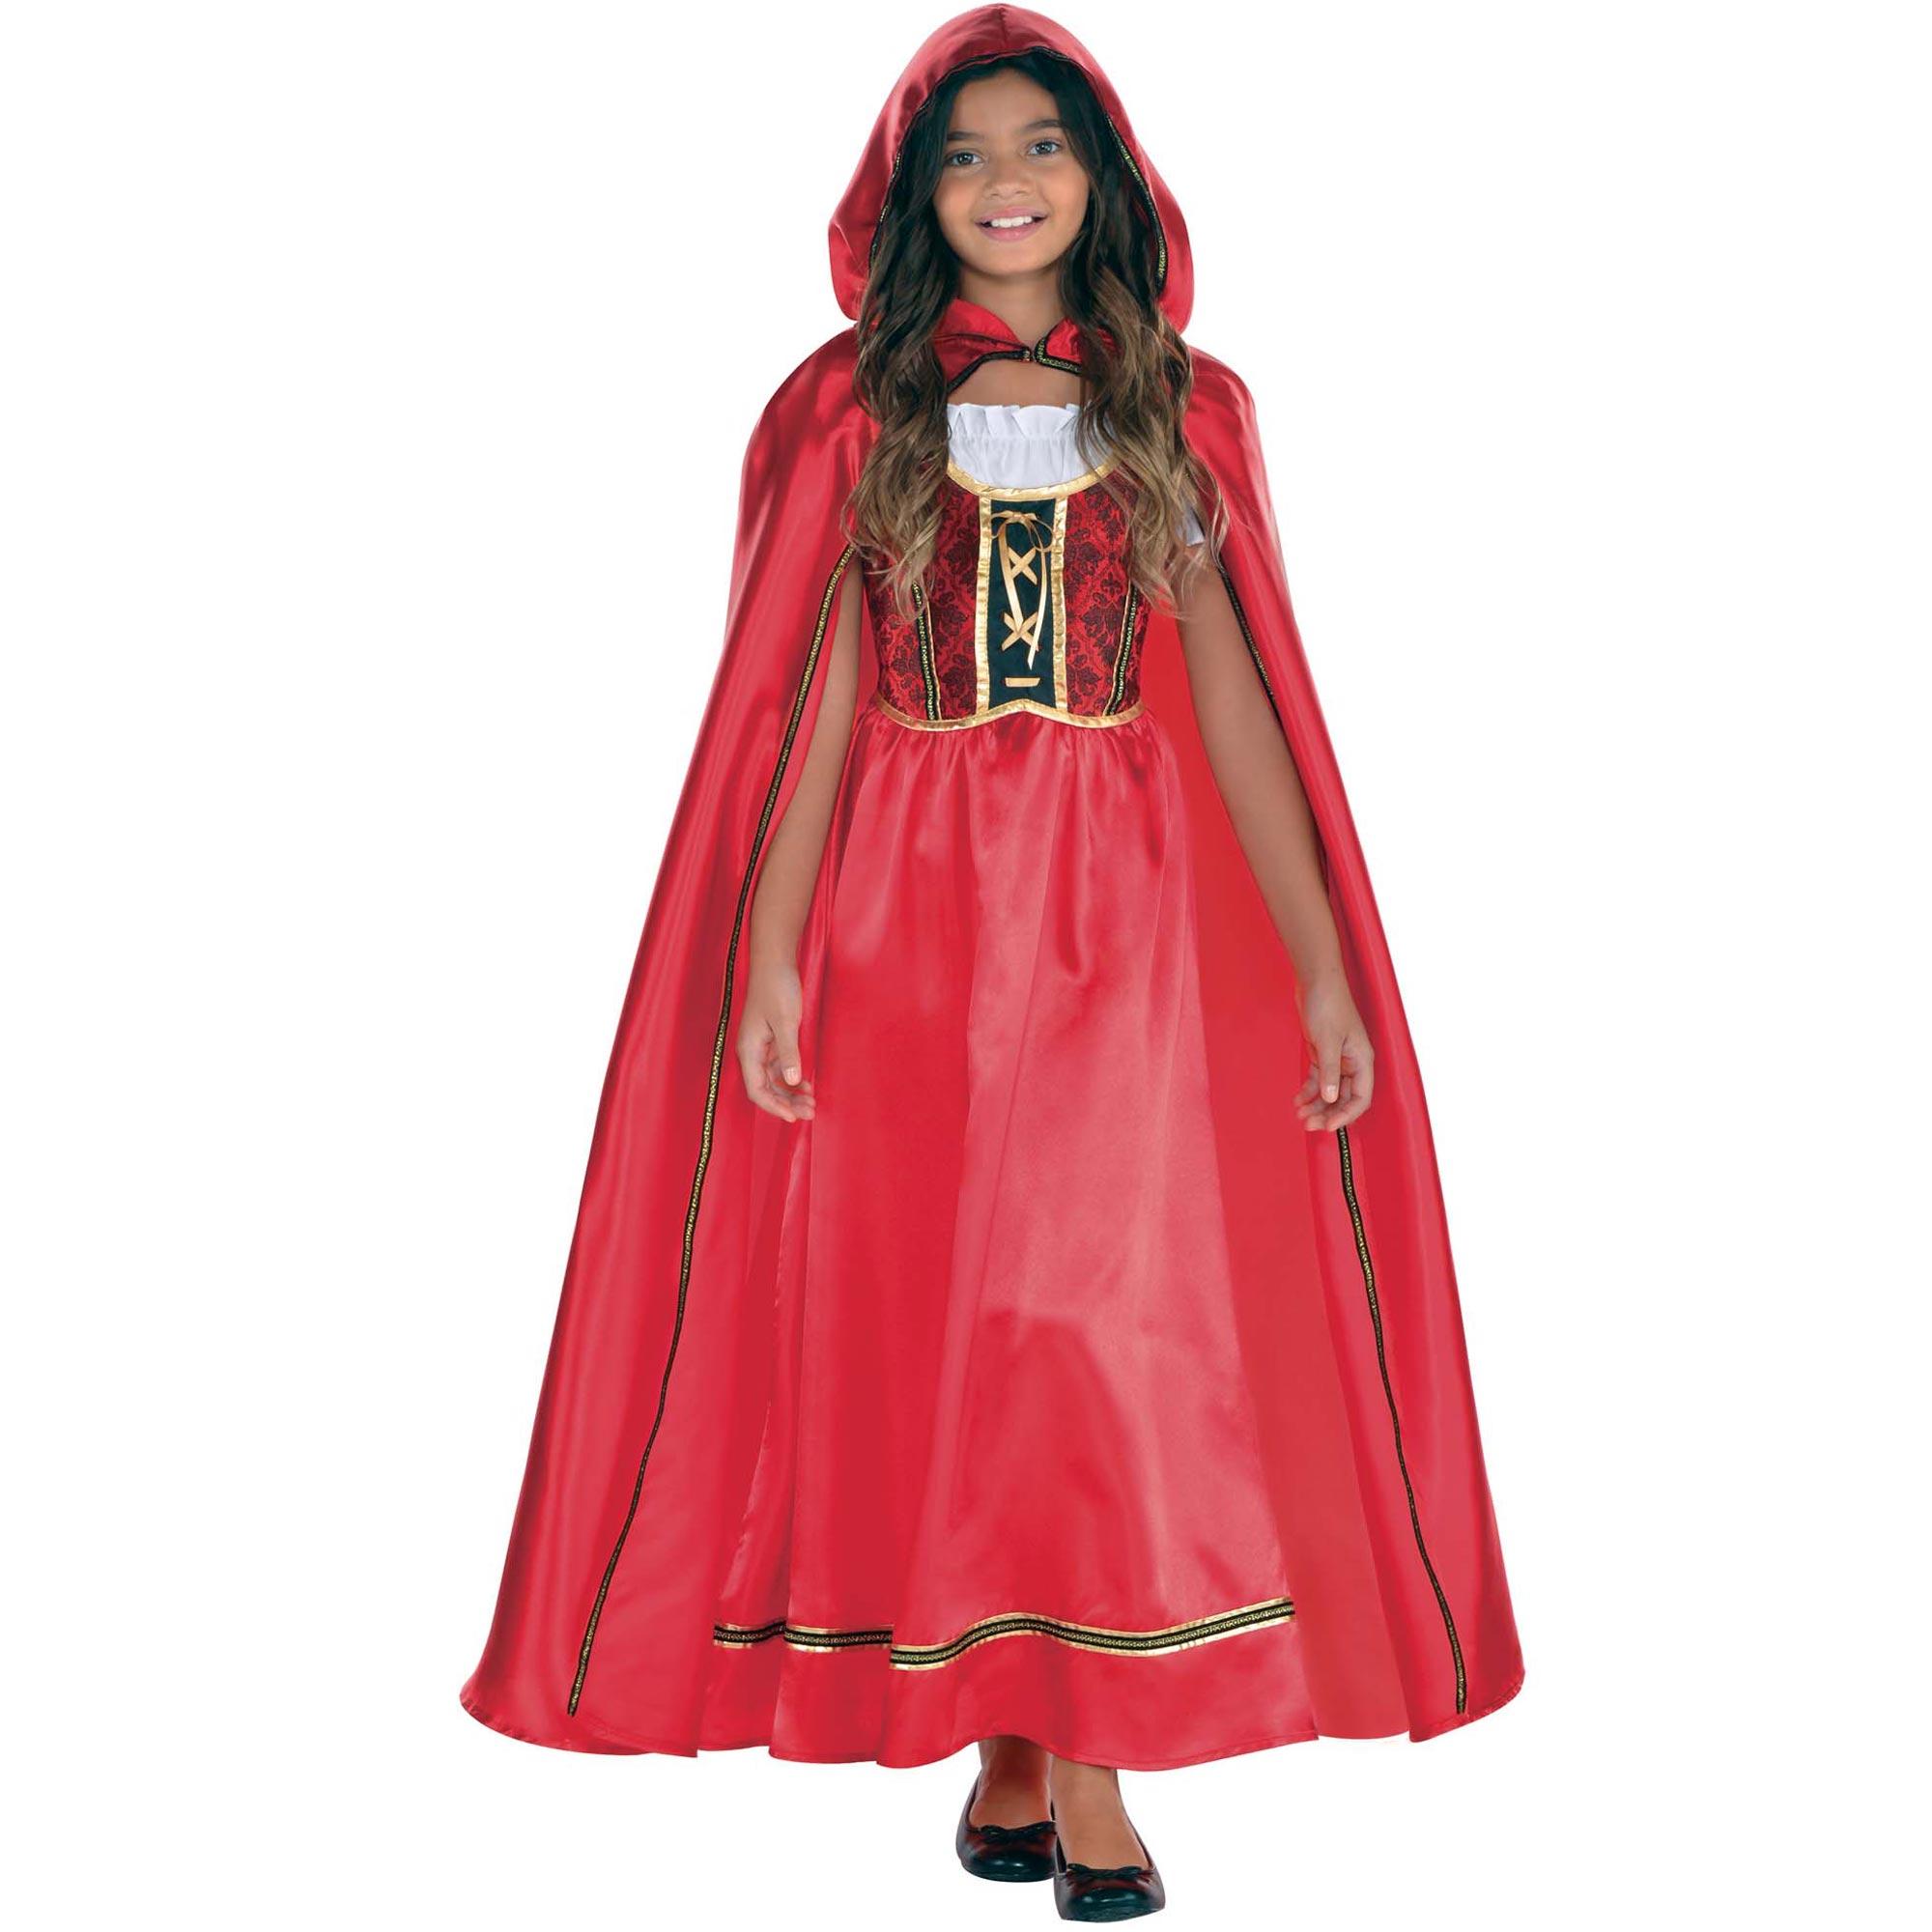 Toddler Fairytale Riding Hood Costume Costumes & Apparel - Party Centre - Party Centre